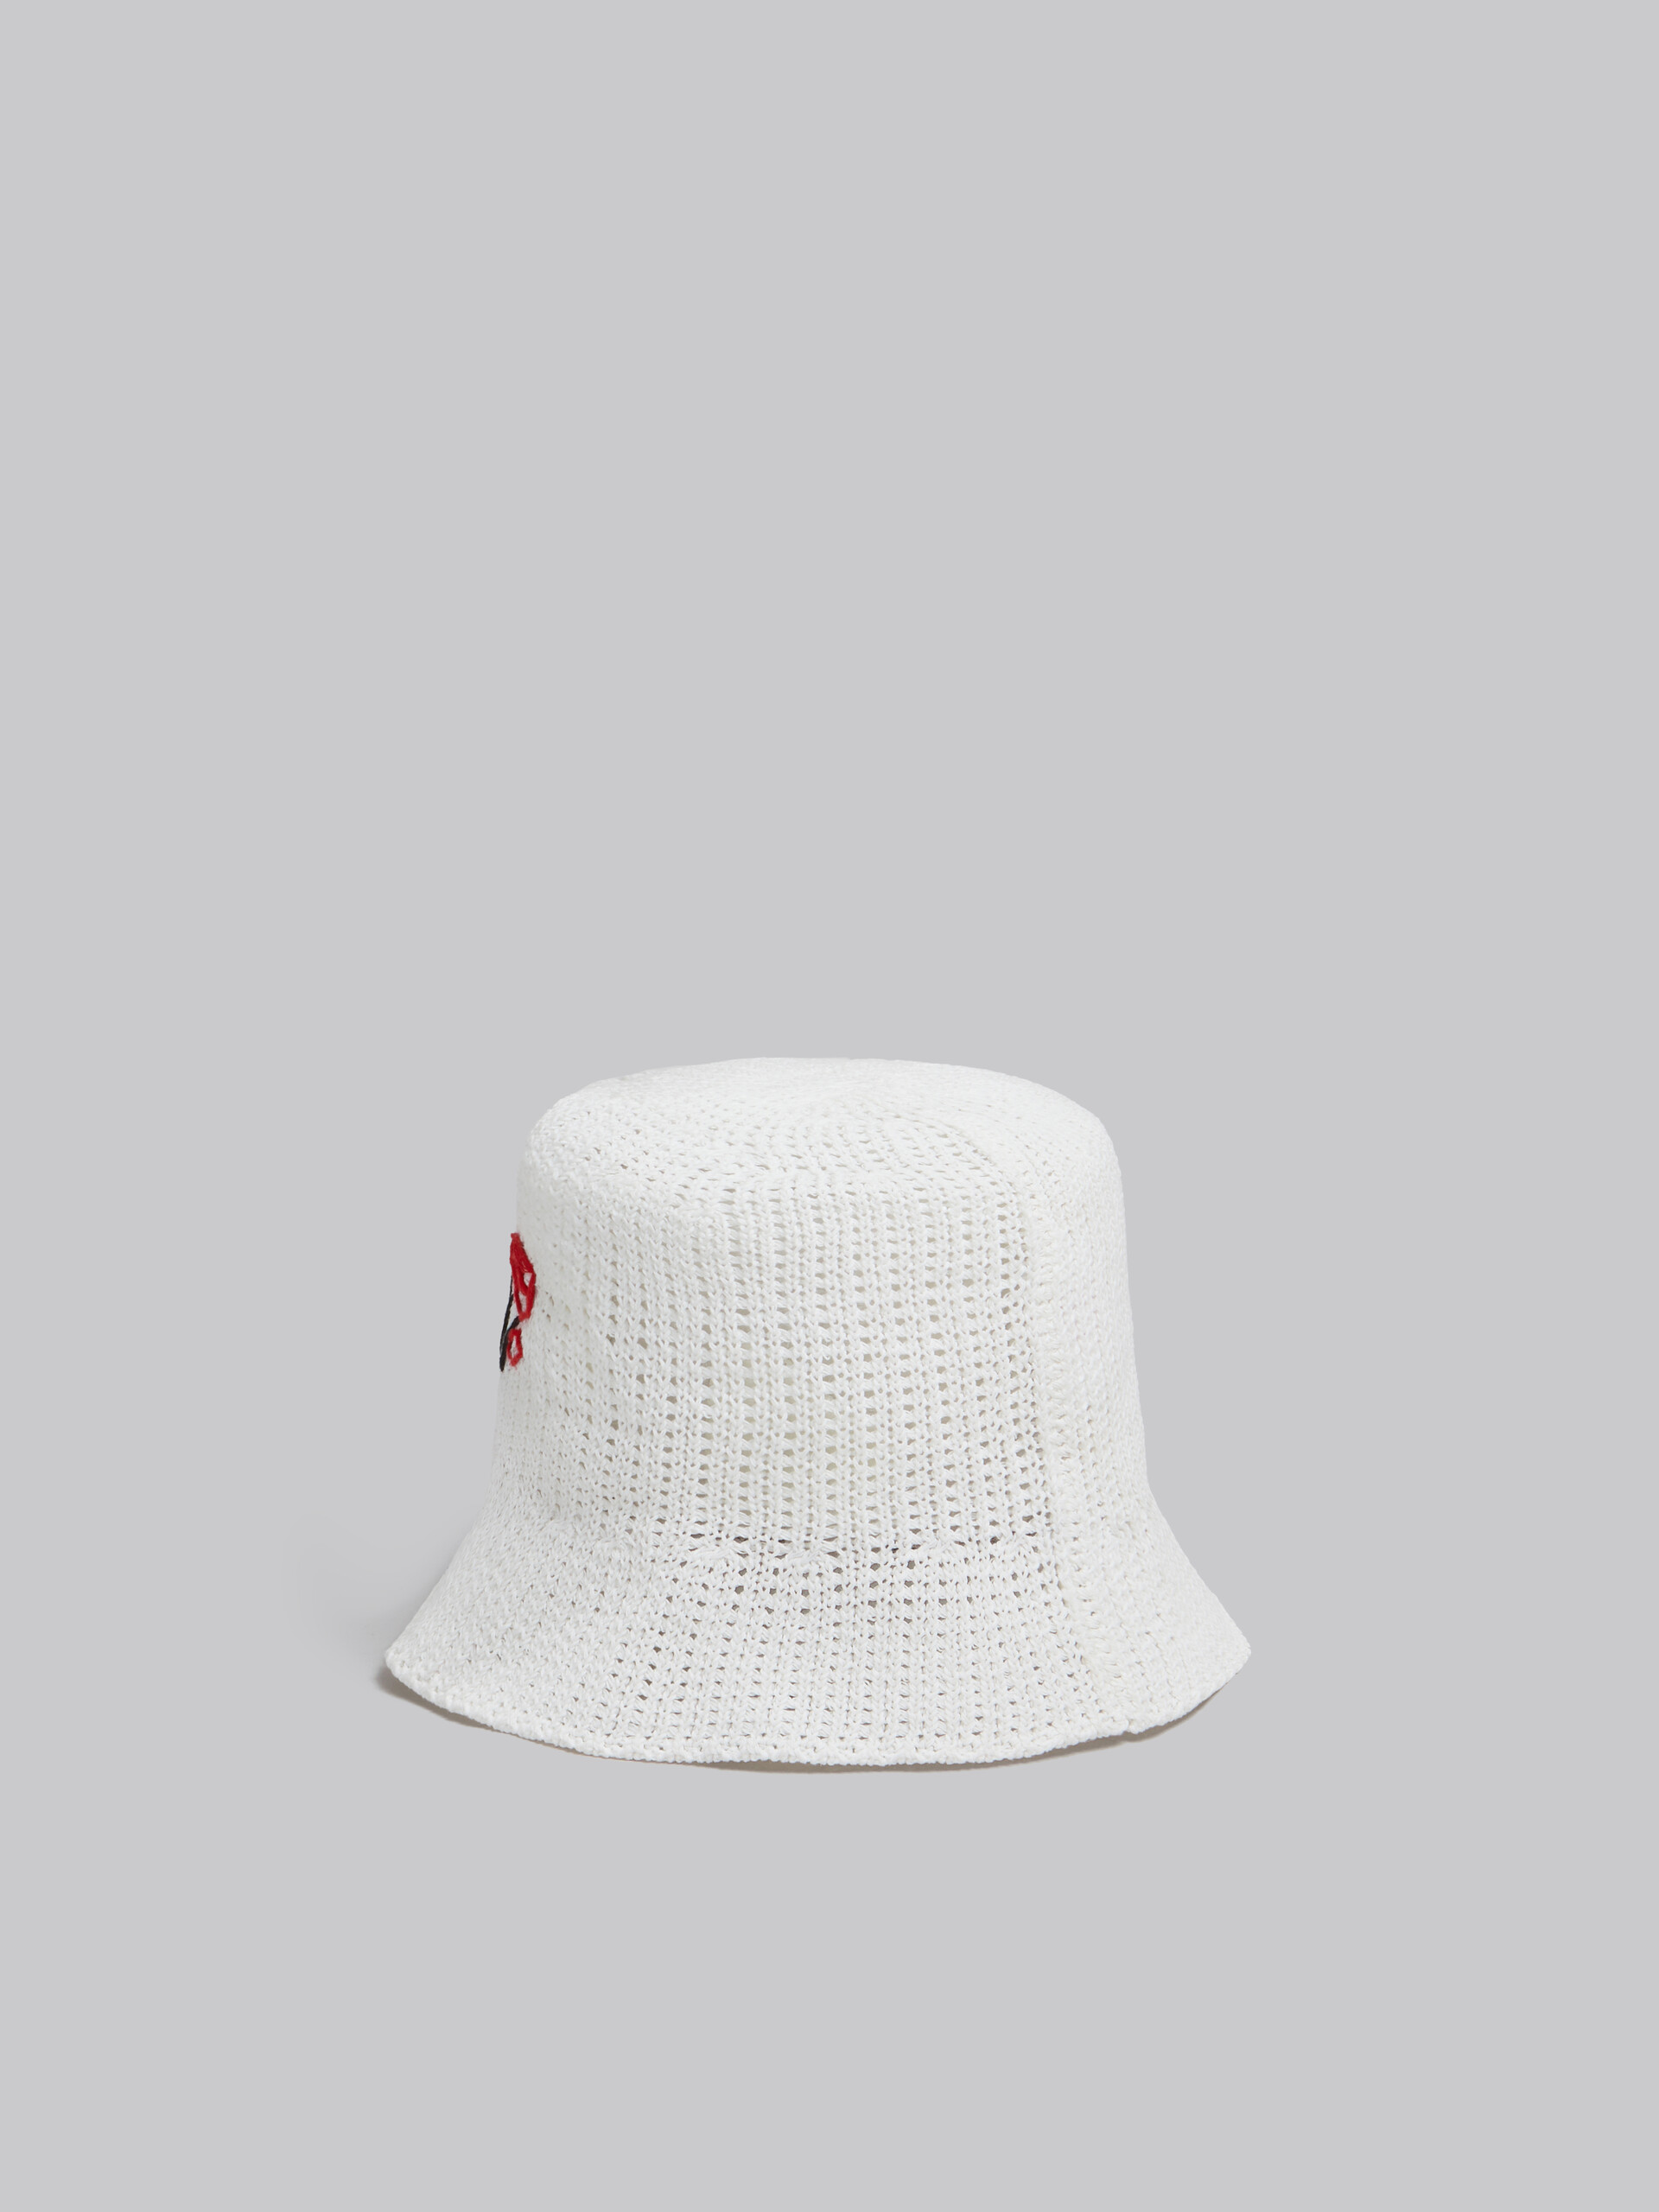 White cotton crochet hat with Marni mending - Hats - Image 3